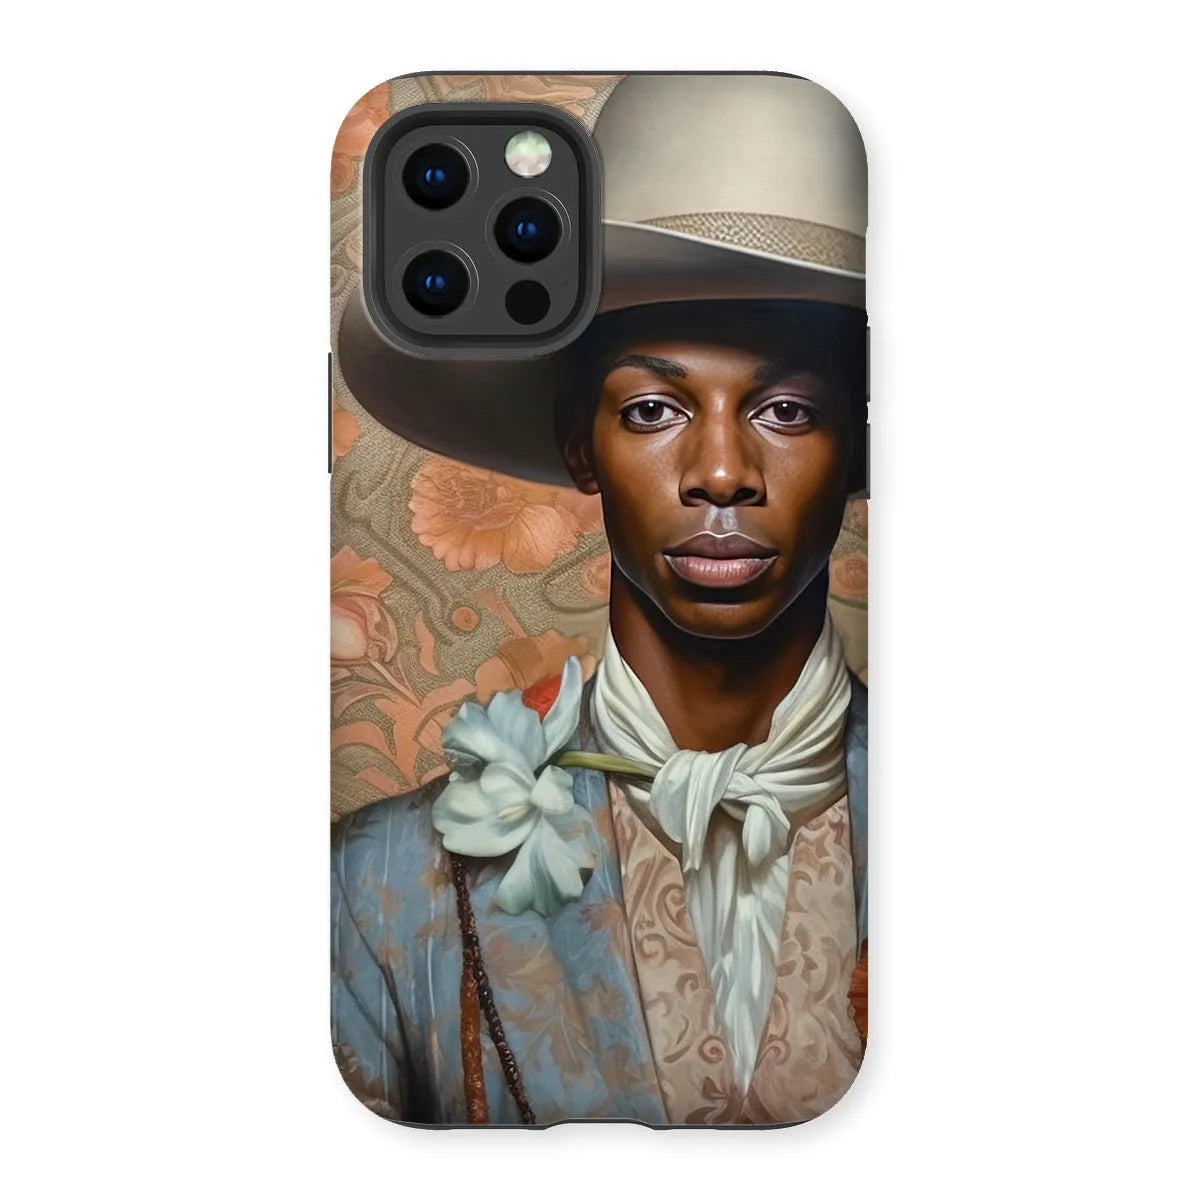 Apollo The Gay Cowboy - Gay Aesthetic Art Phone Case - Iphone 12 Pro / Matte - Mobile Phone Cases - Aesthetic Art